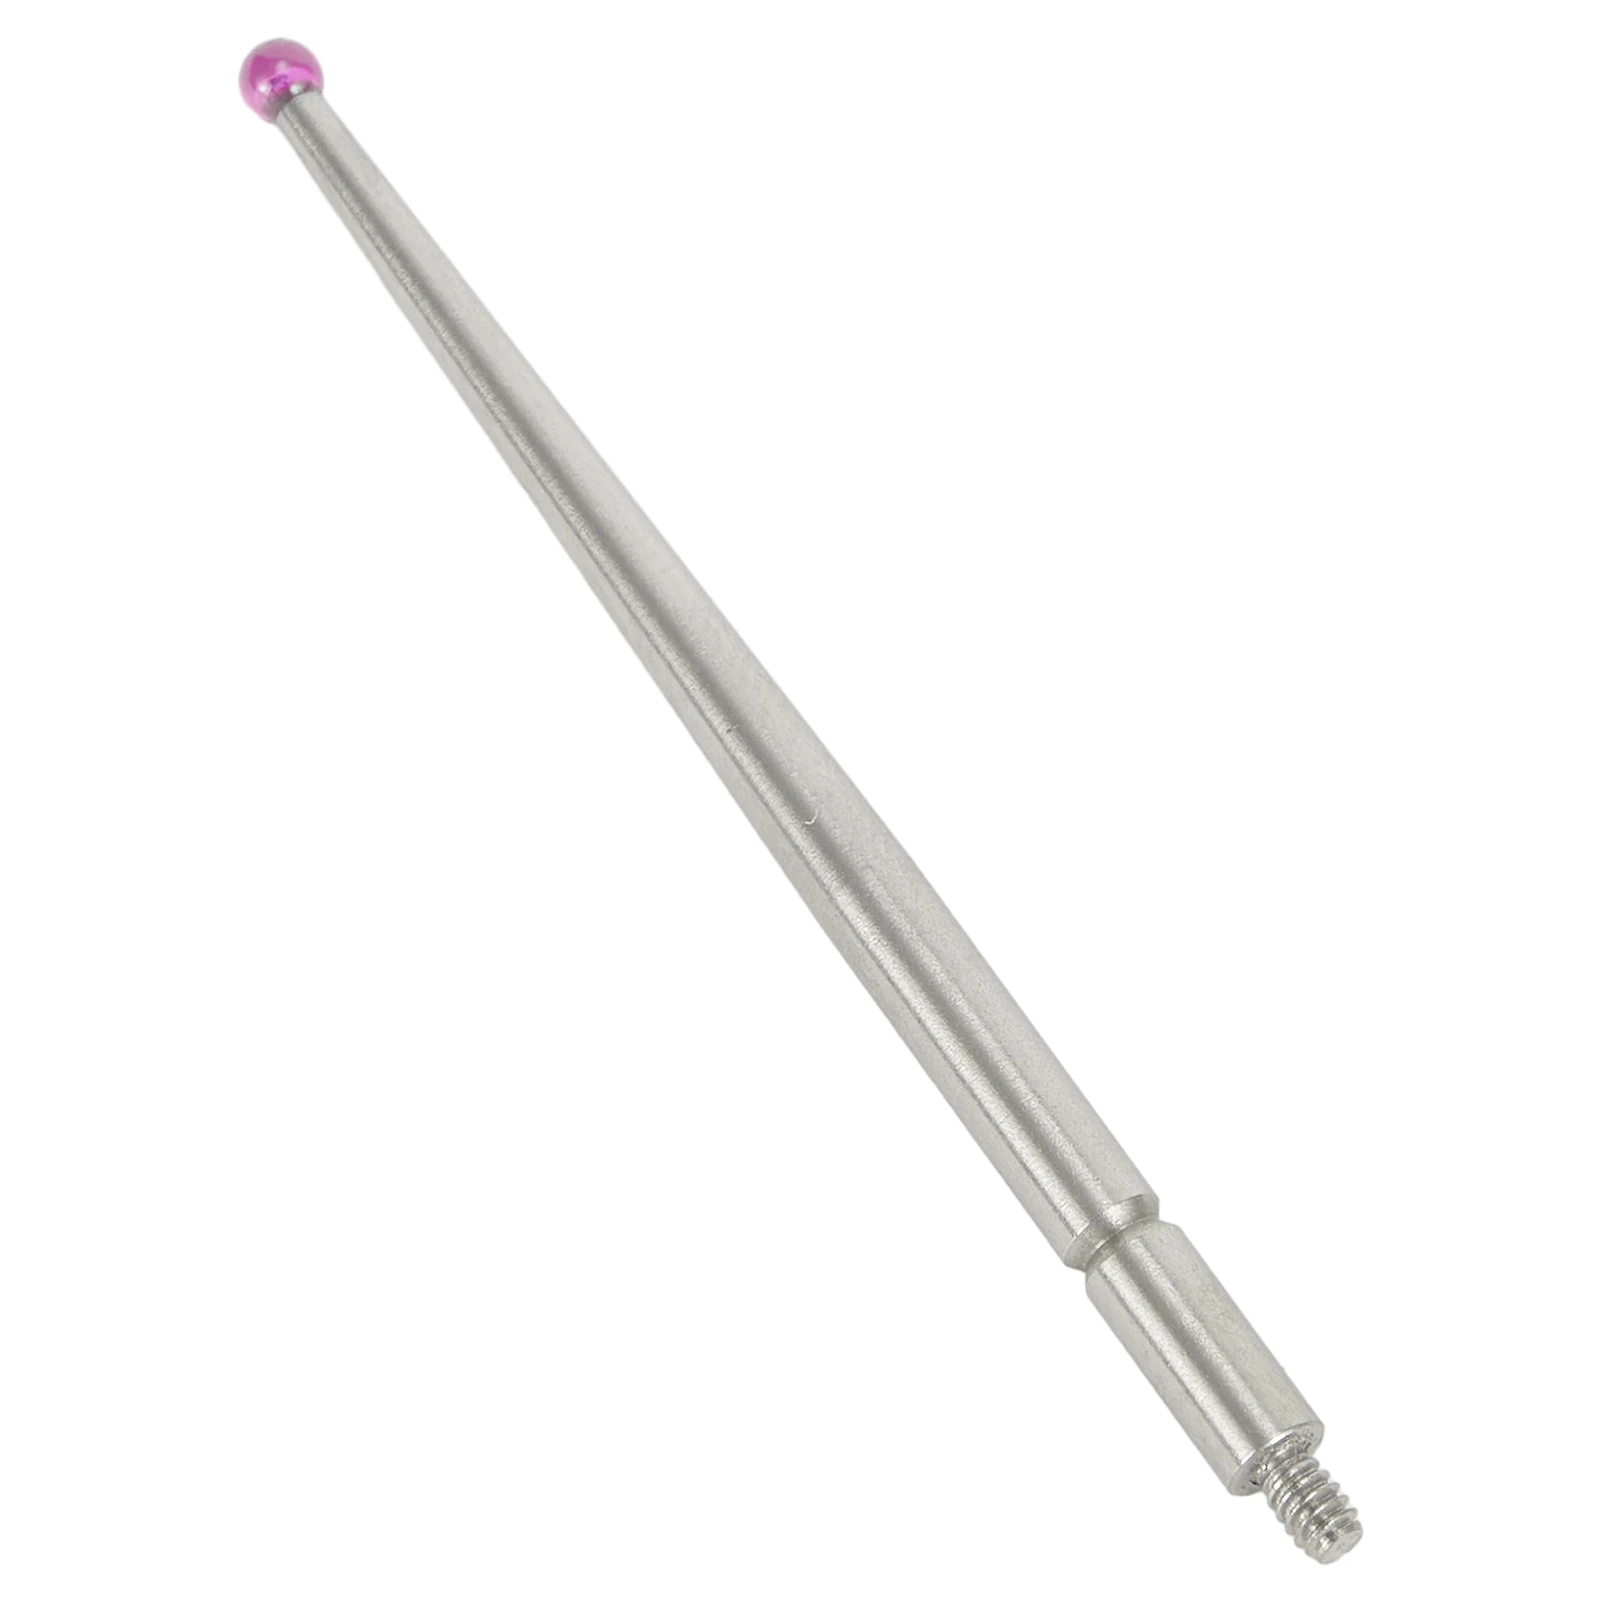 Contact Points Probe For Dial Test Indicator M1.6 Threaded Shank 2mm Diameter Ru By Ball For 513-115 For 513-215F contact points probe m1 6 threaded shank 21cza211 contacts 44 5mm length for 513 115 for 513 215f for 513 215fe